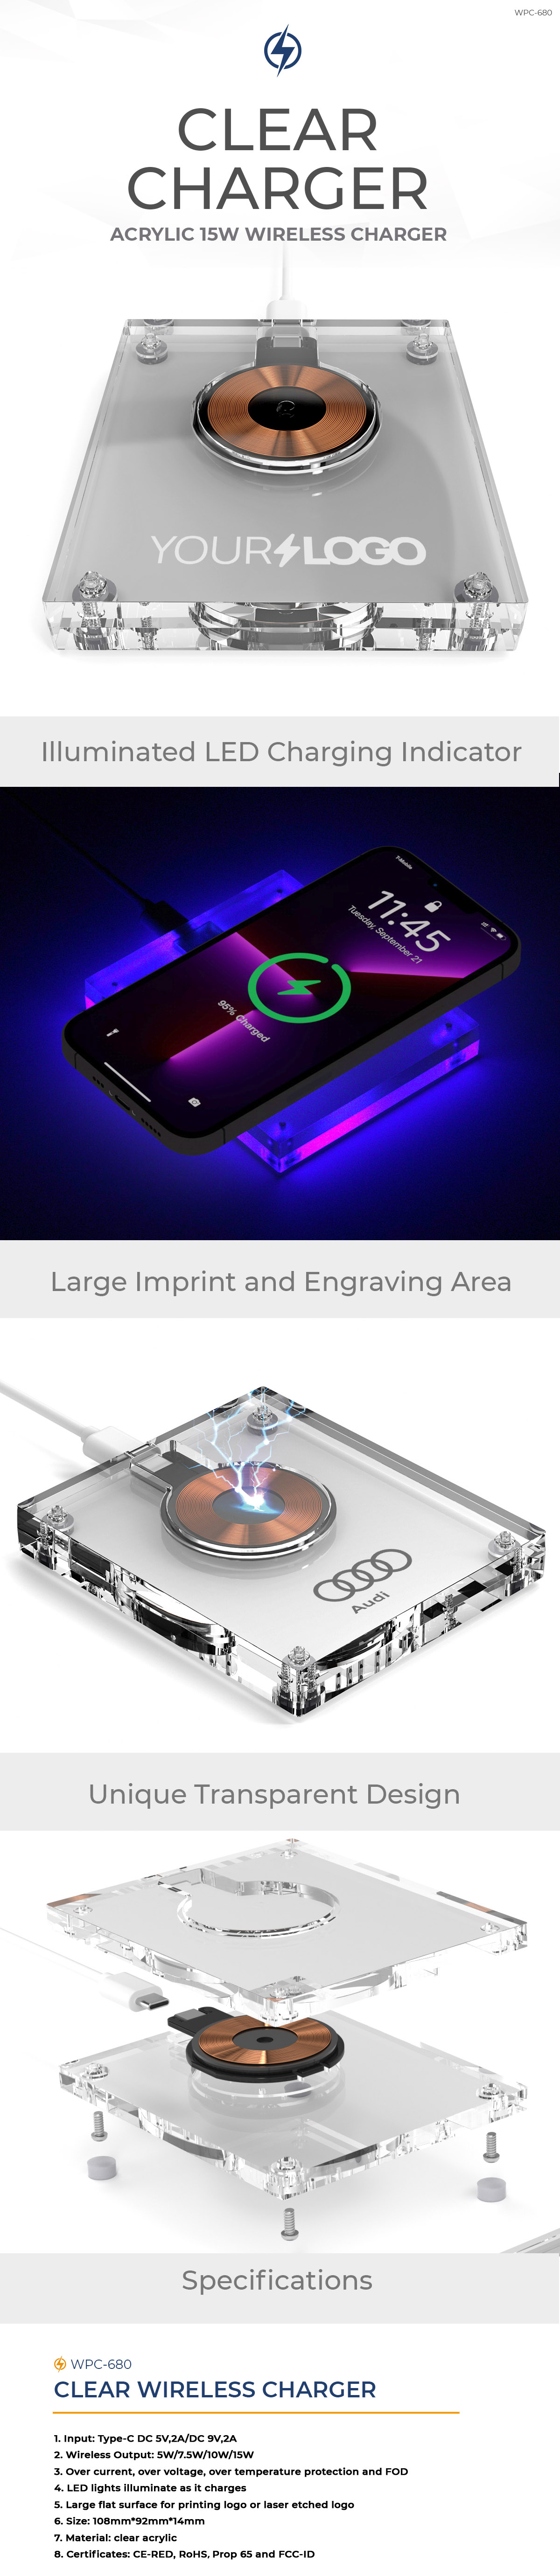 Acrylic-Wireless-Charger-Clear-Transparent